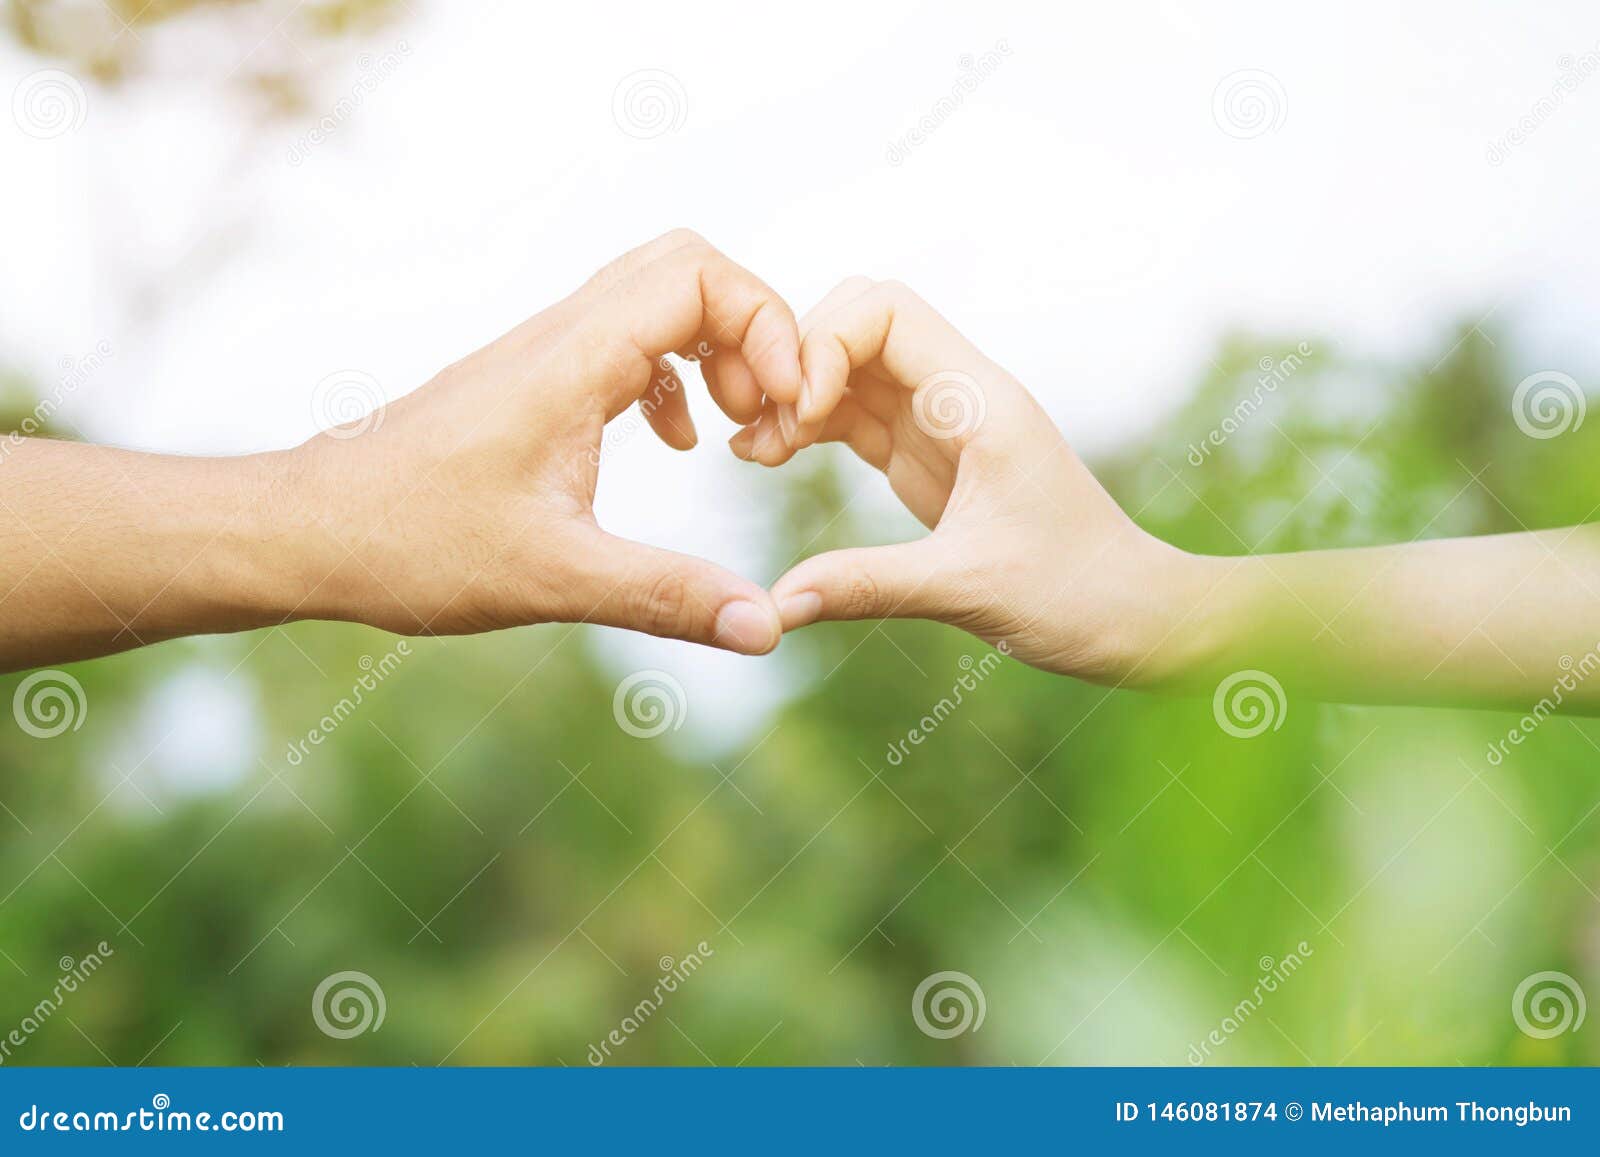 Young Couple Lover Show Holding Hands Make Heart Shape Over in Public Parks image